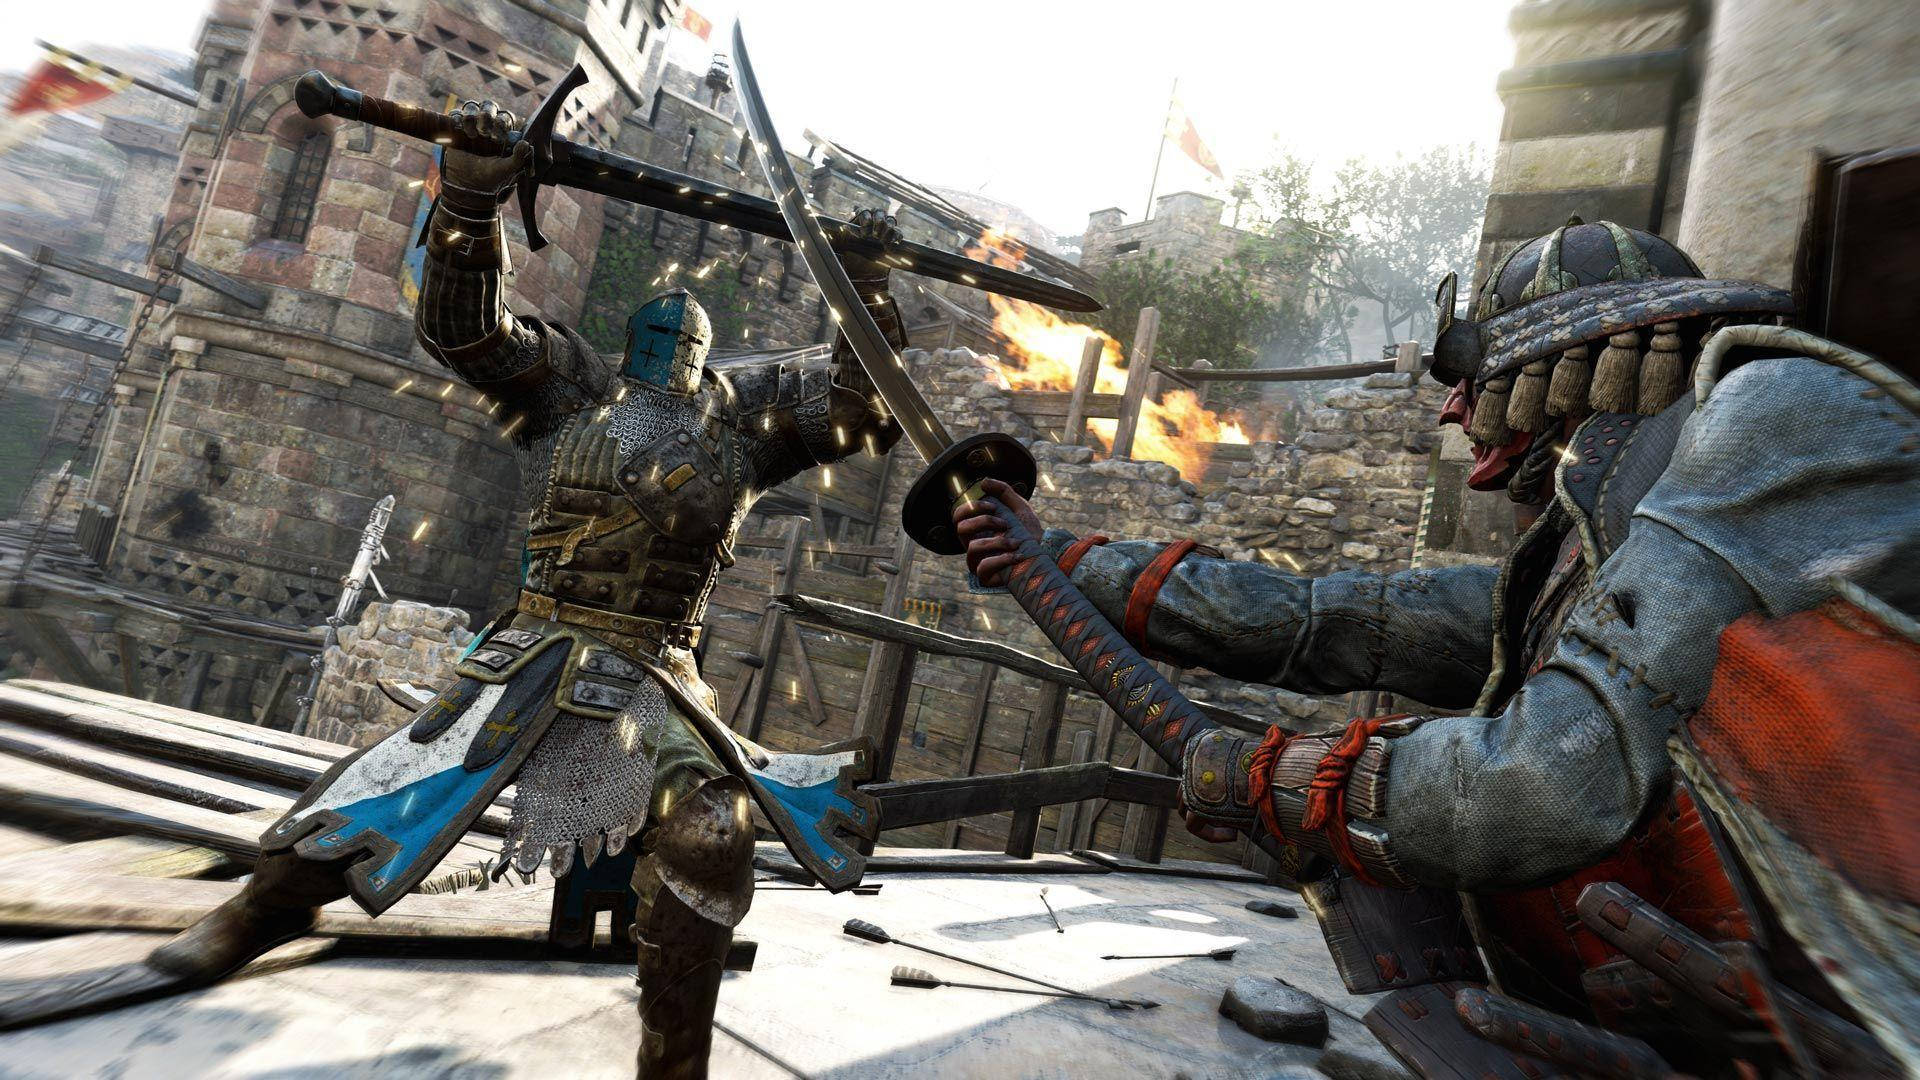 For Honor Game Warden Blocking Orochi's Sword